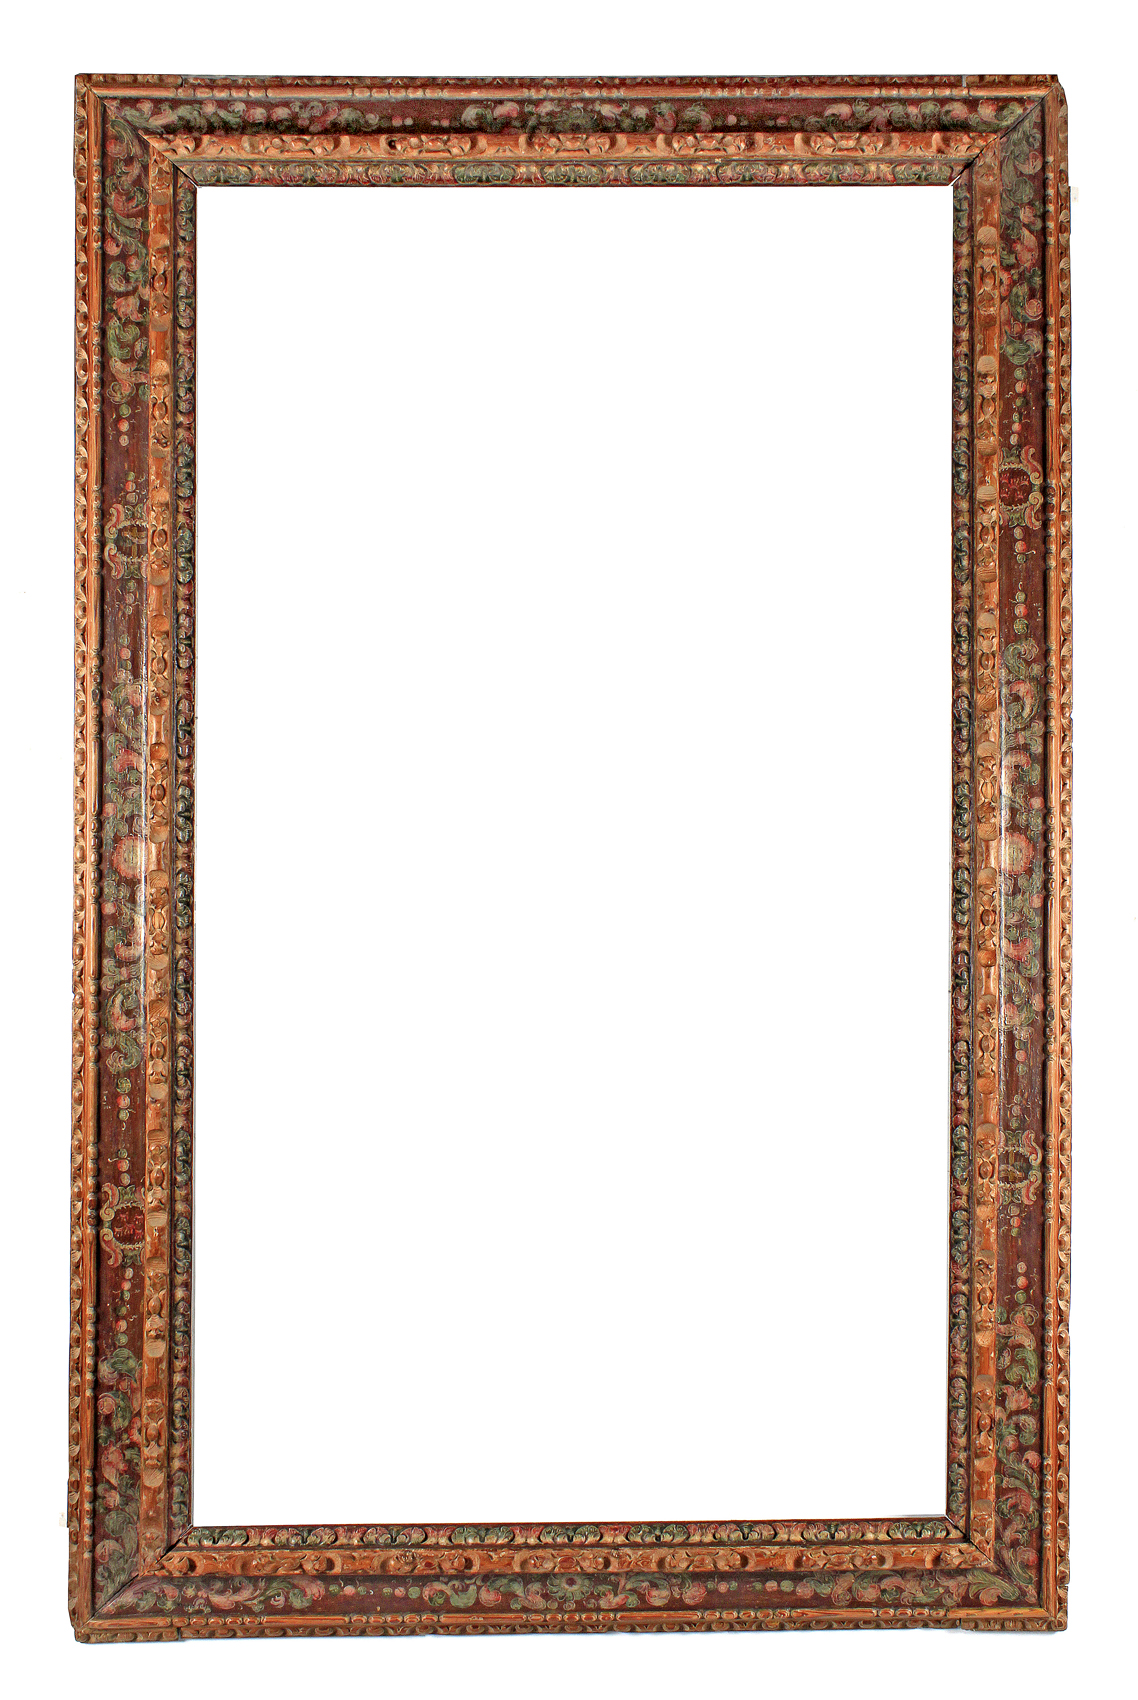 An early 17th century Spanish frame in carved and polychromed wood